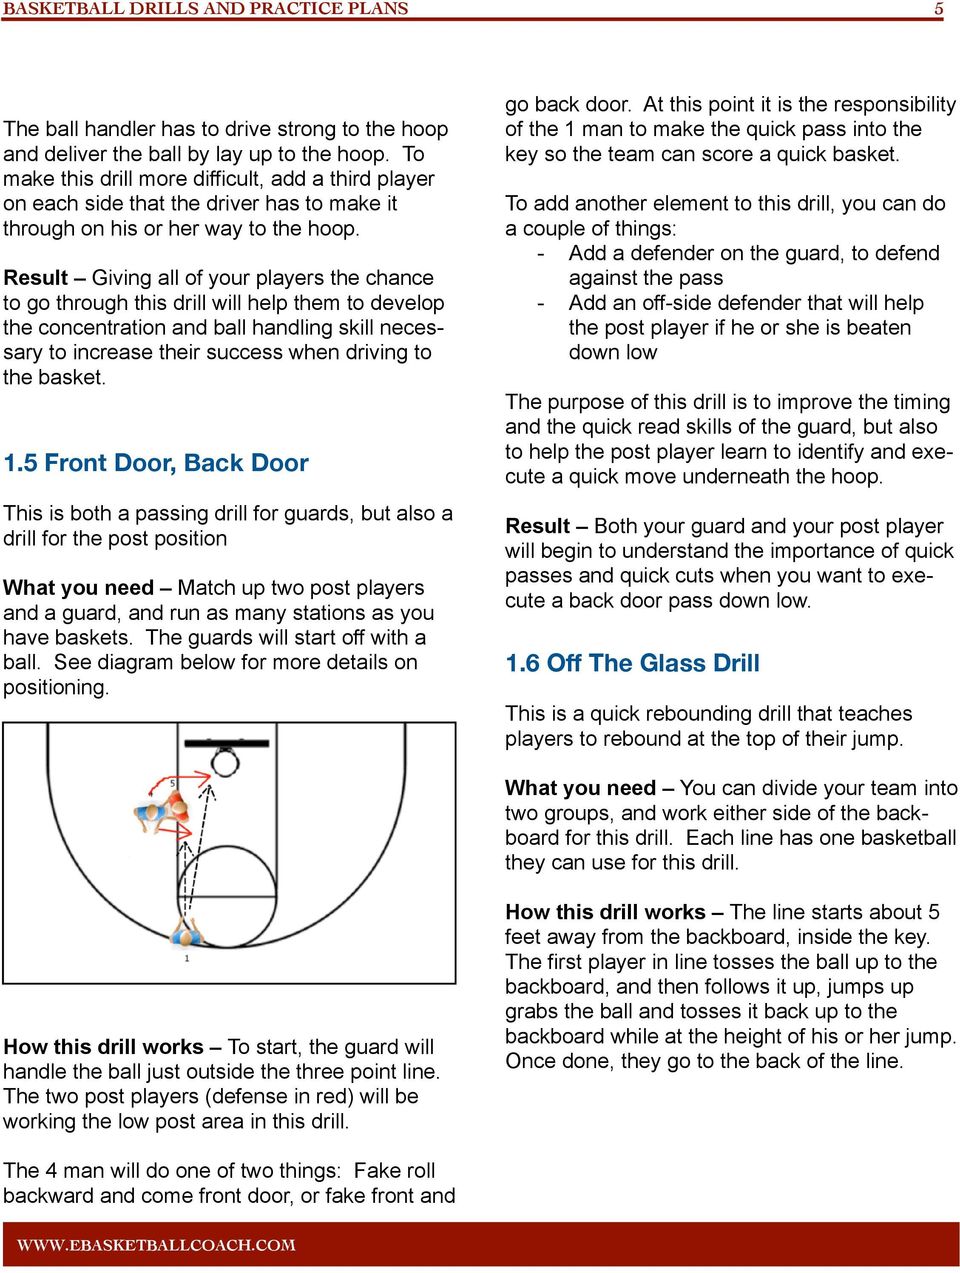 Result Giving all of your players the chance to go through this drill will help them to develop the concentration and ball handling skill necessary to increase their success when driving to the